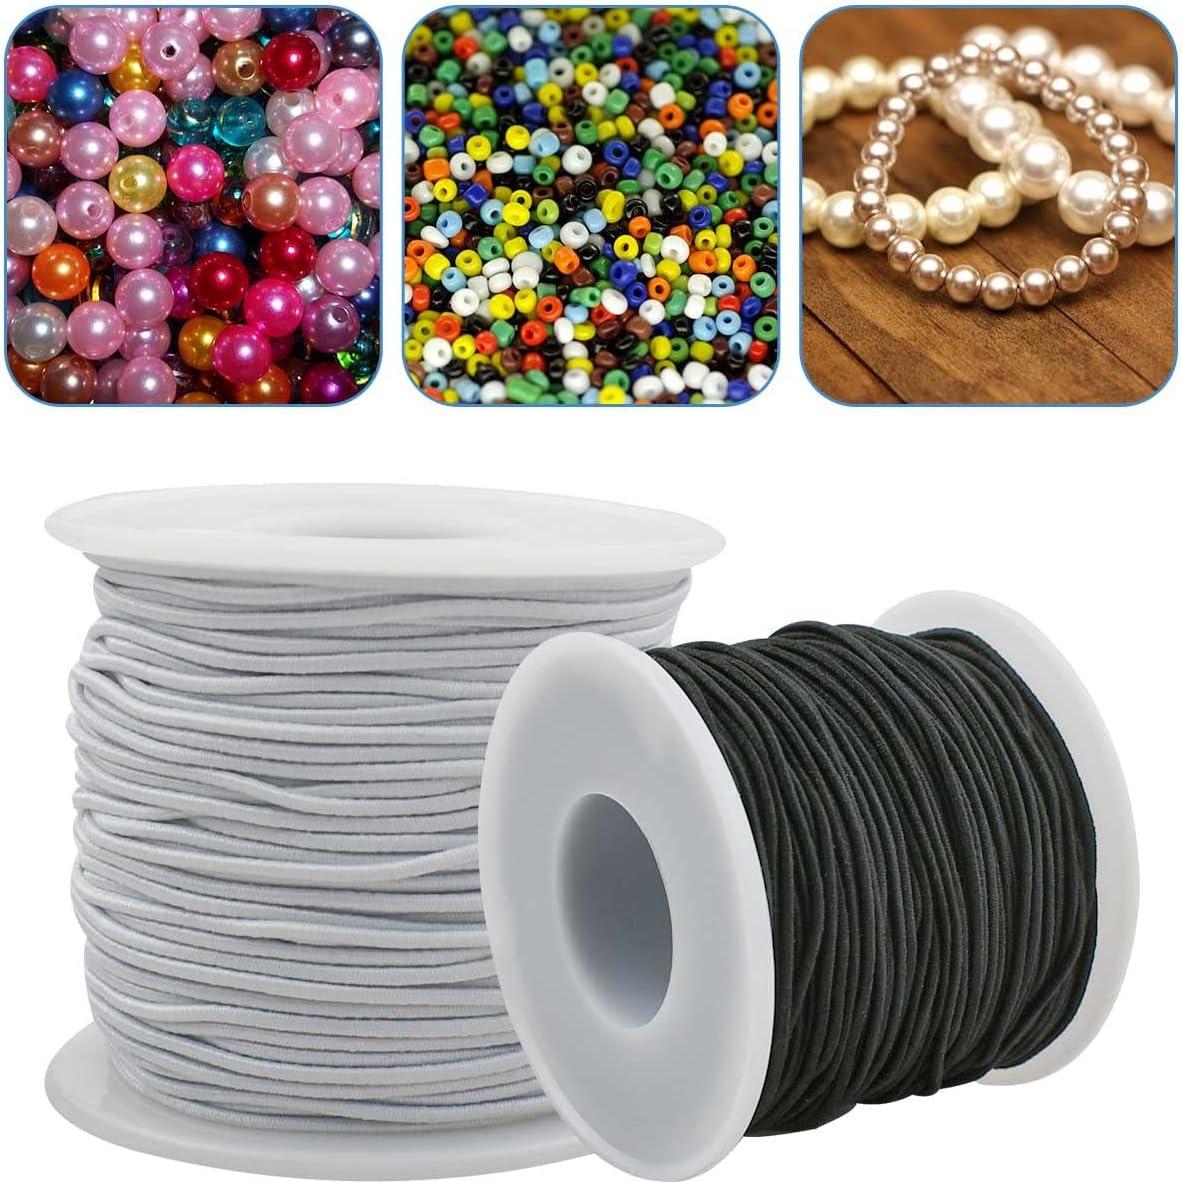 Stretchy String for Bracelets, 4 Rolls 1 mm Sturdy Elastic String Elastic  Cord for Jewelry Making, Necklaces, Beading (2 Black+ 2 White)